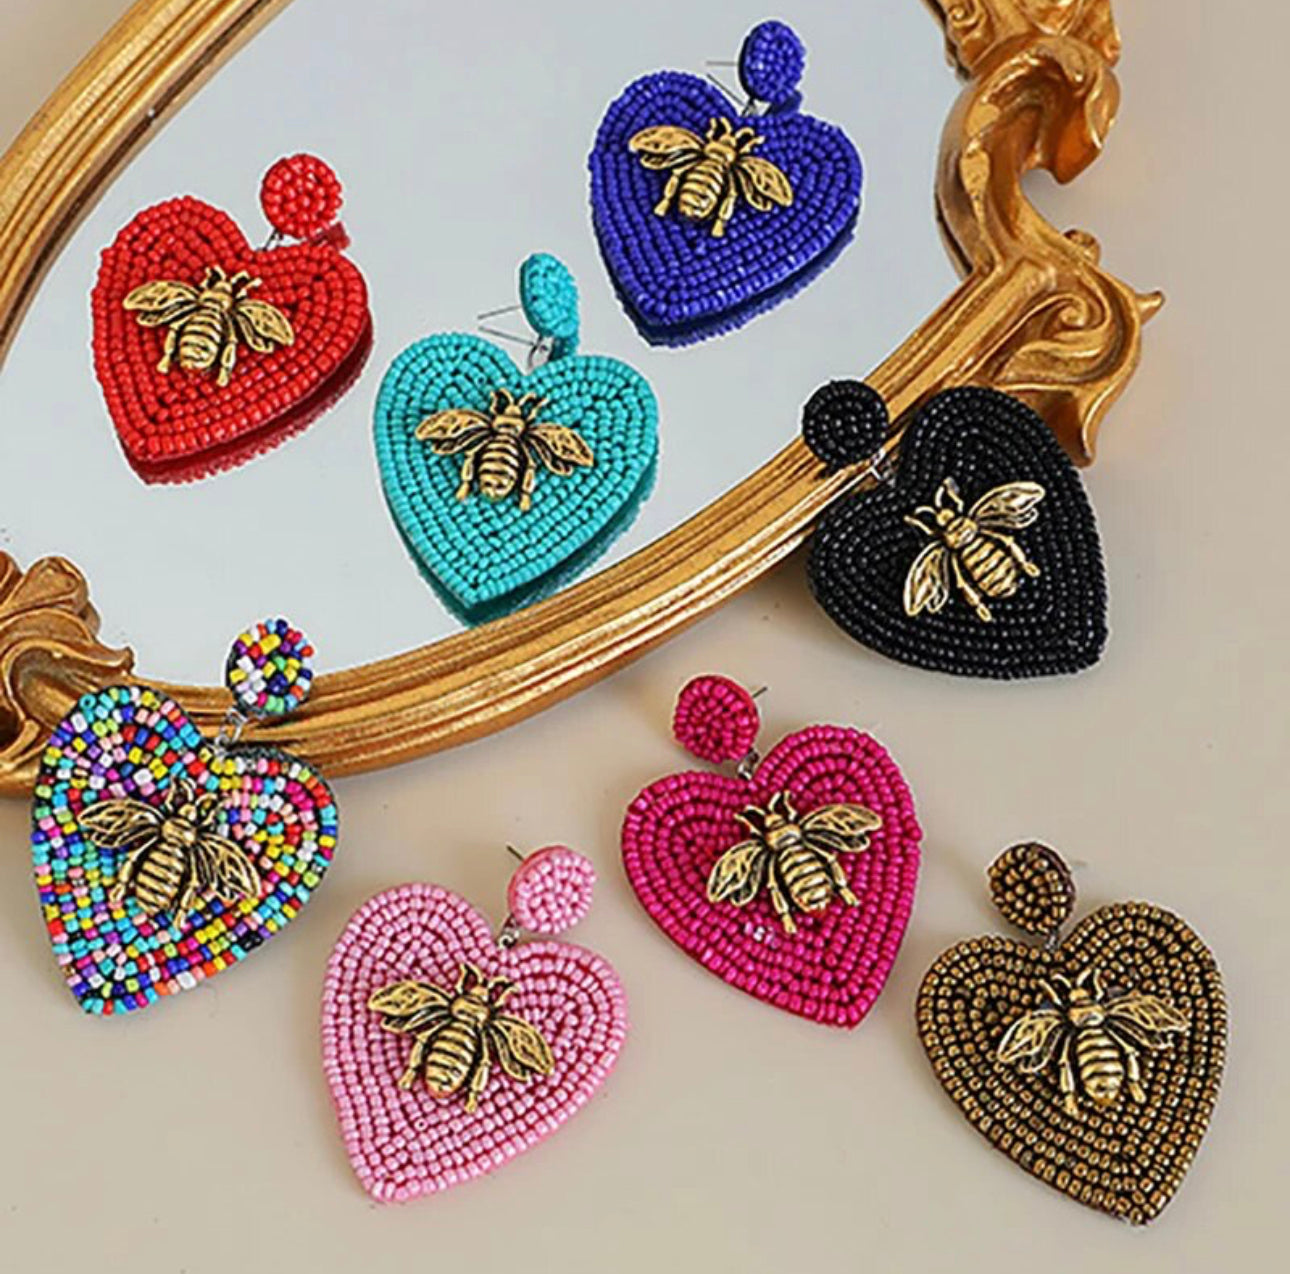 Beaded Heart Earrings with a Golden Bee